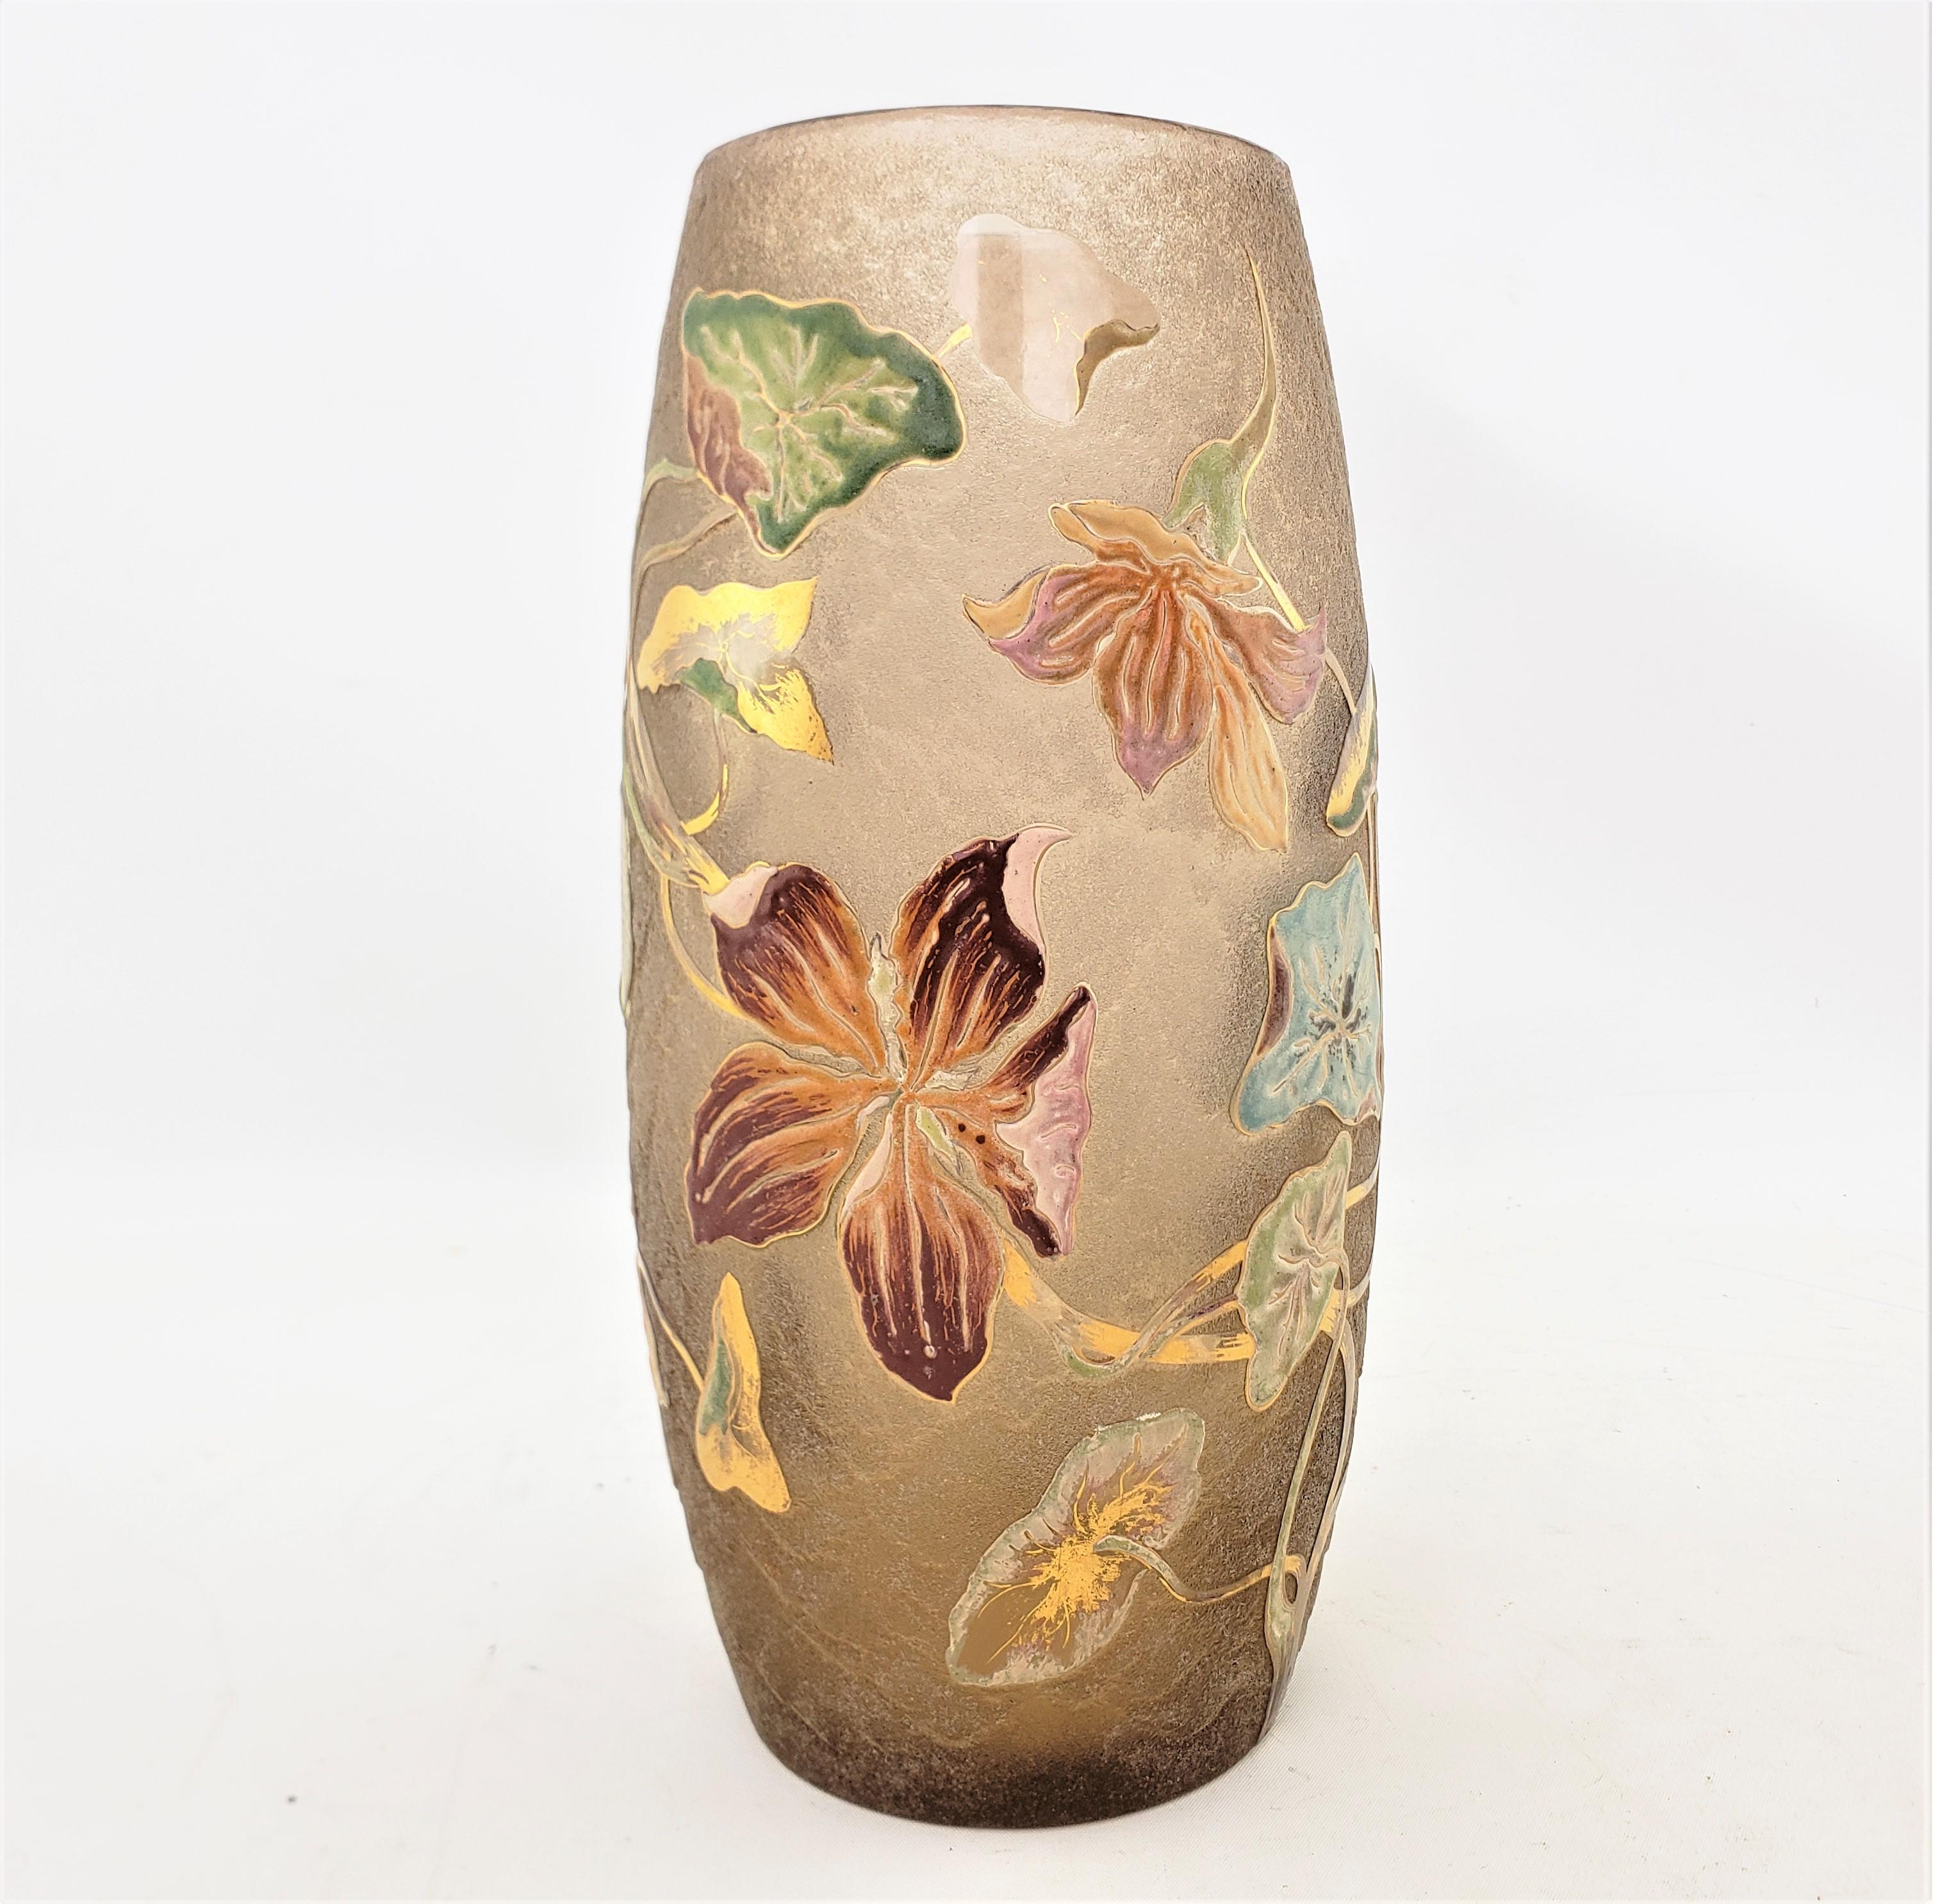 This antique art glass vase was done by the renowned Emile Galle of France in approximately 1900 in the period Art Nouveau style. The vase is done with a deep yellow or amber base and the outside has been acid etched and decorated with enamelled